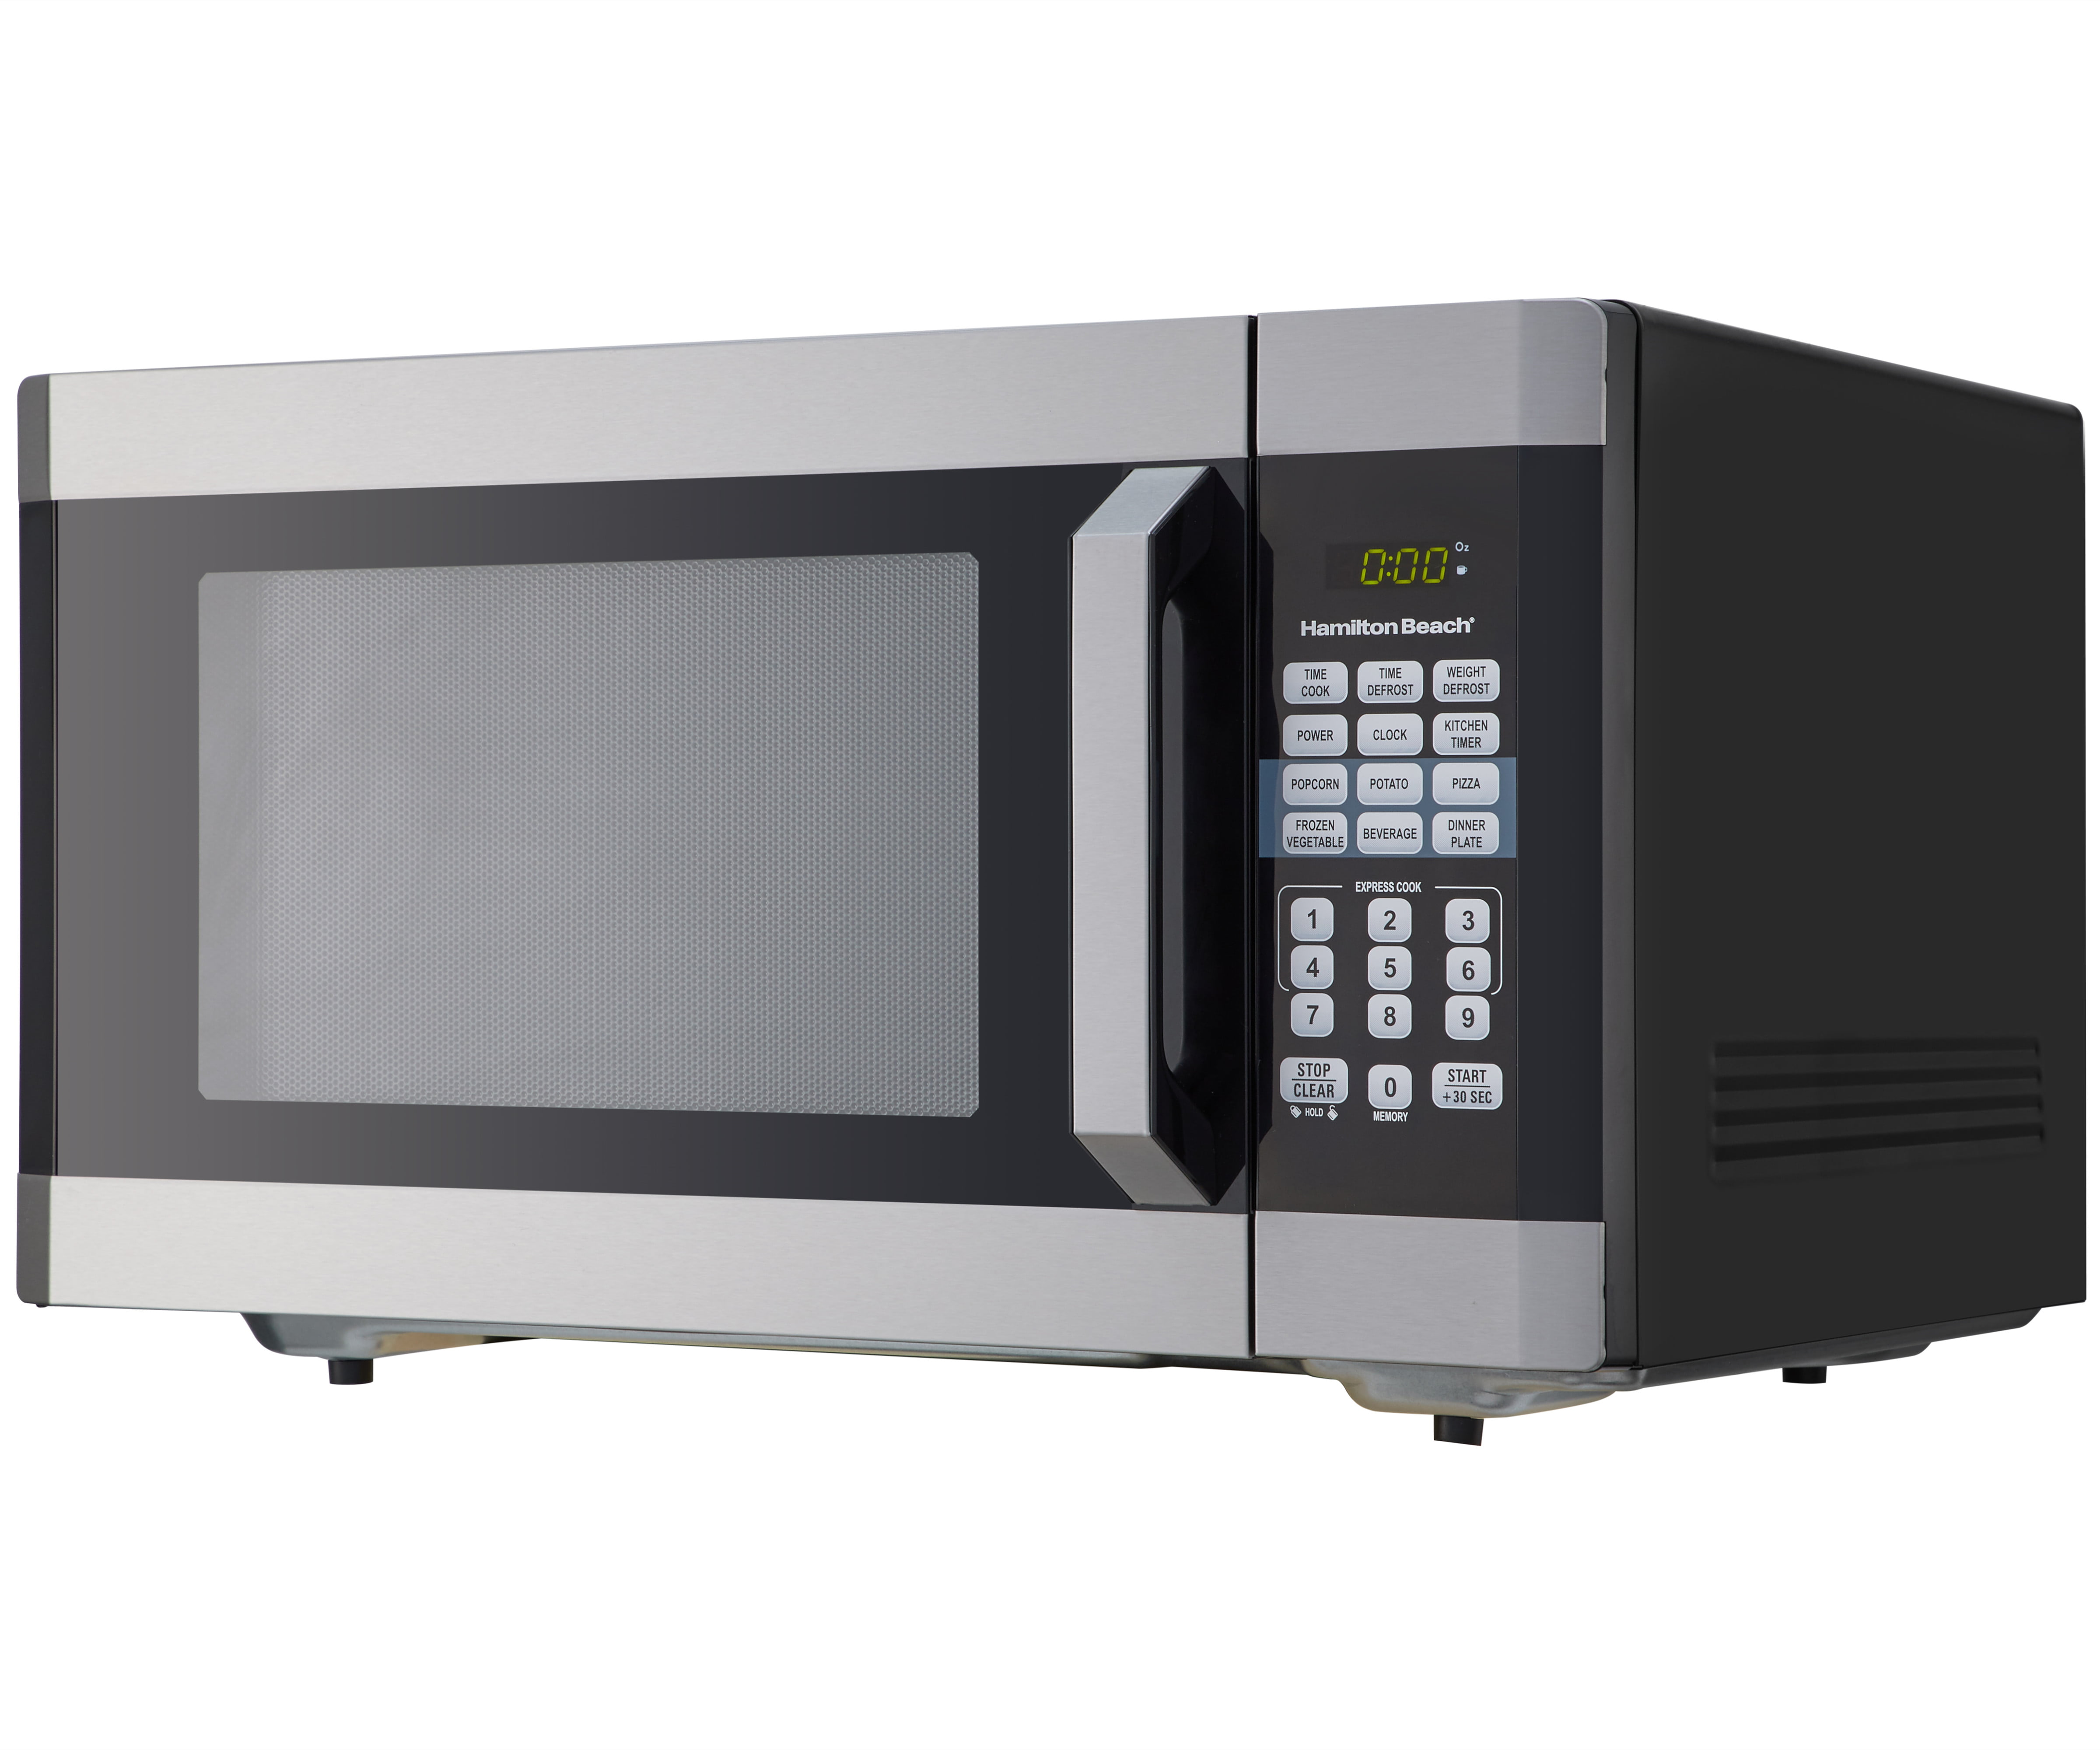 Stainless Steel Digital Microwave Oven by Hamilton Beach